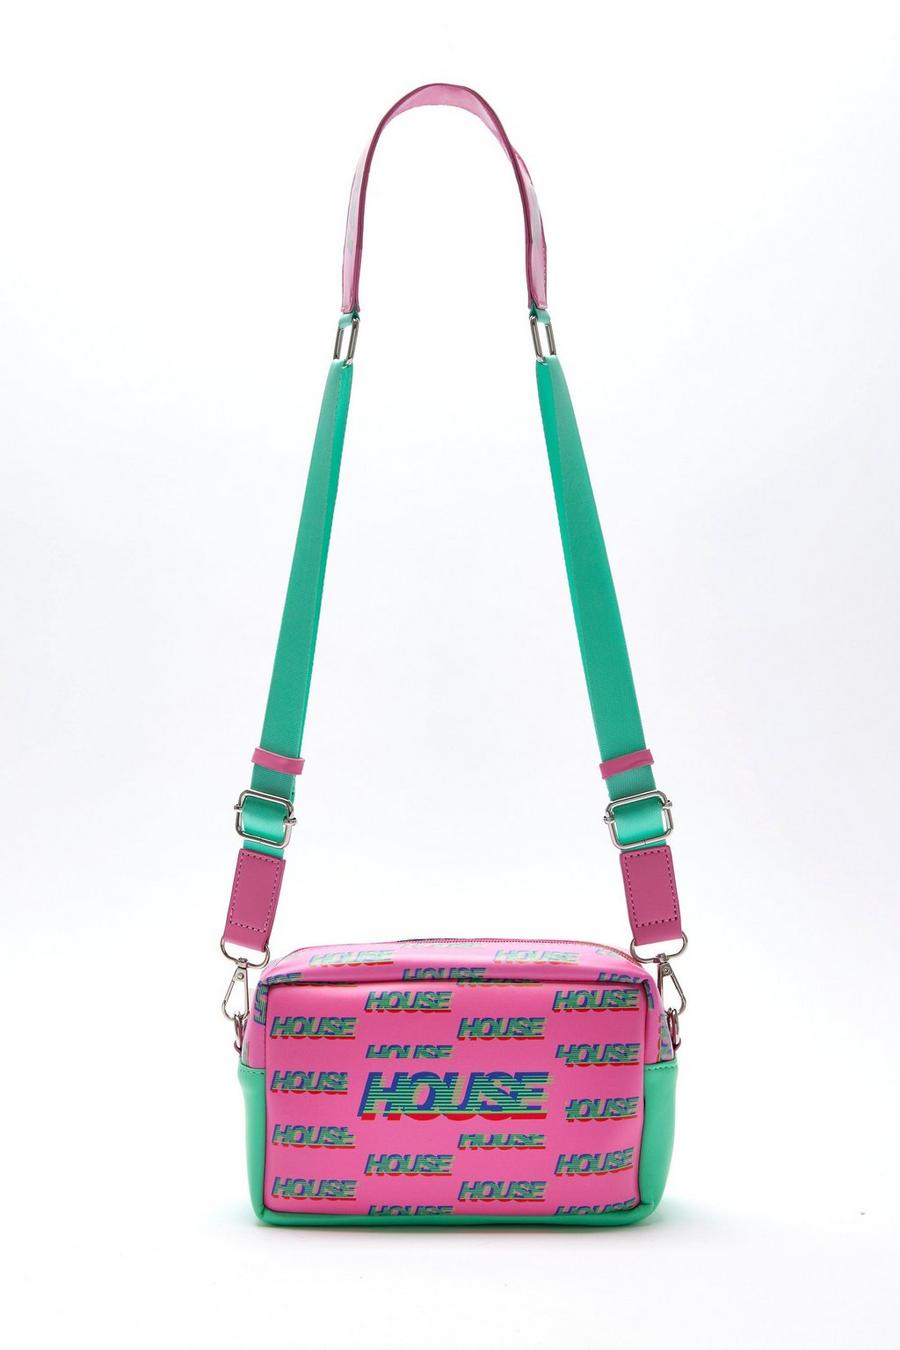 Cross Body Bag In Pink And Mint With ‘House’ Print image number 1